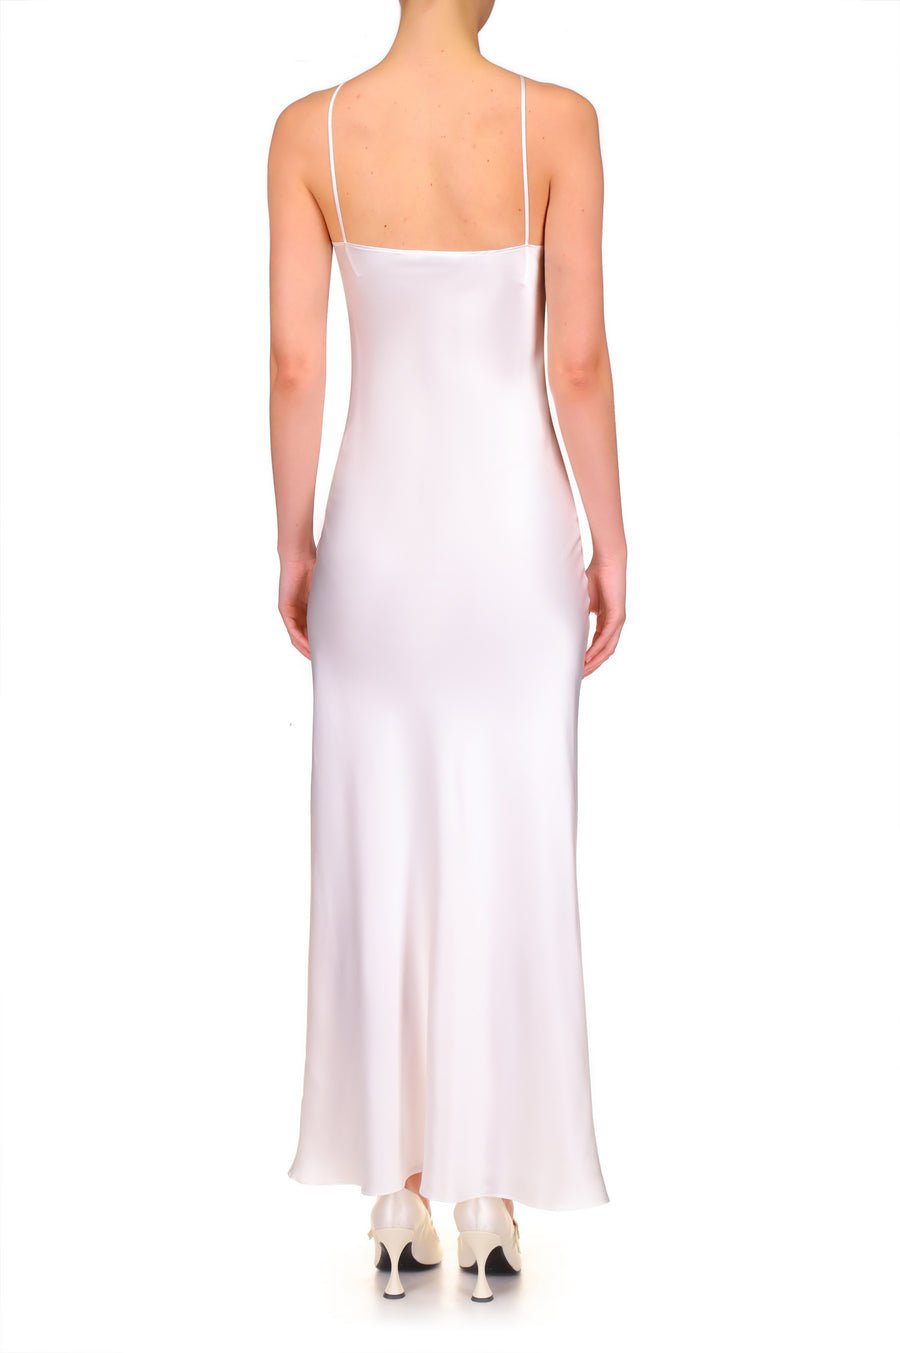 Silk Halter Nightdress in Off-White with Leavers Lace